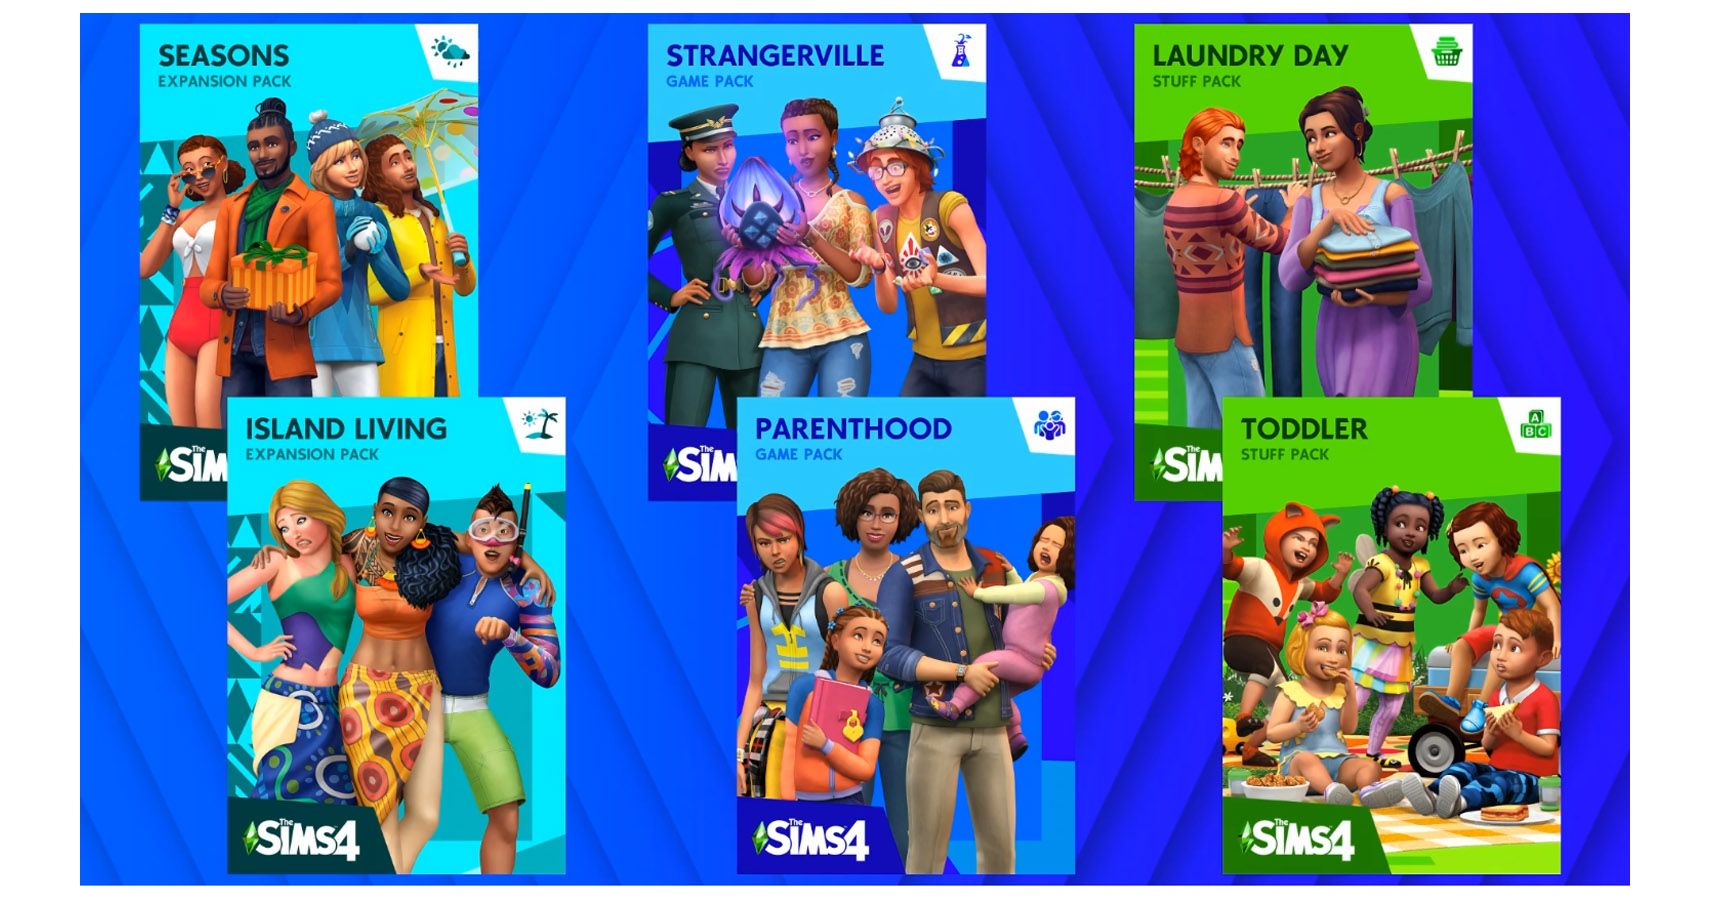 Sims 4 Team Announces Brand New Look For The Game